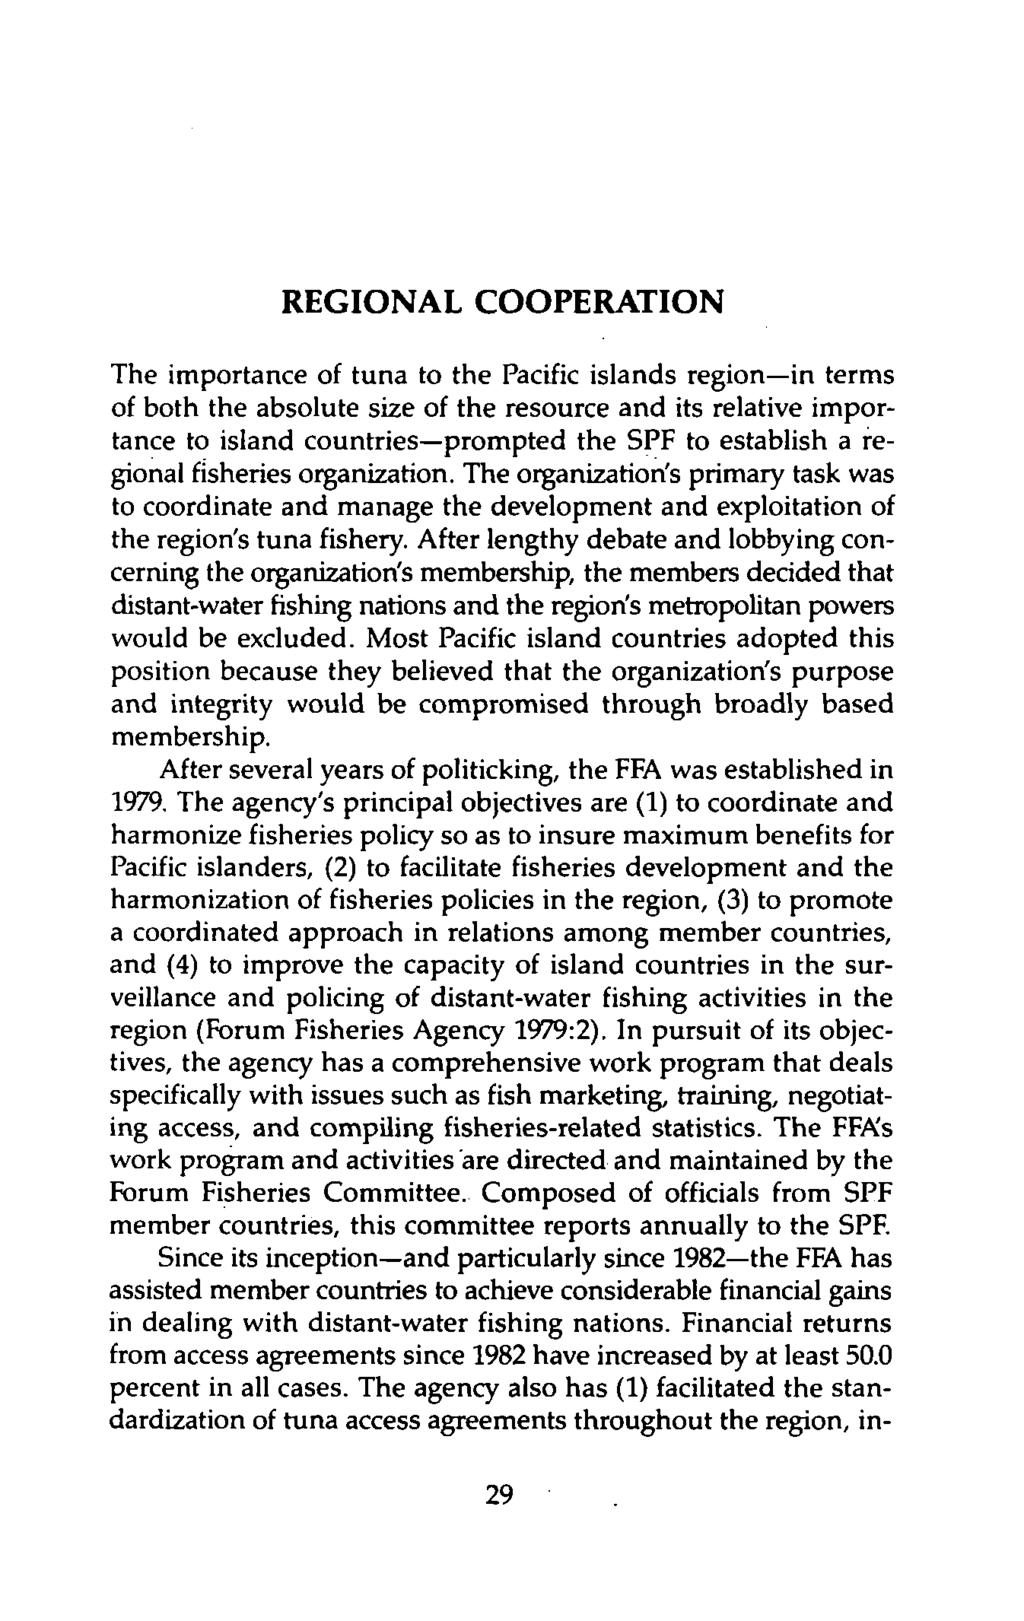 REGIONAL COOPERATION The importance of tuna to the Pacific islands region in terms of both the absolute size of the resource and its relative importance to island countries prompted the SPF to